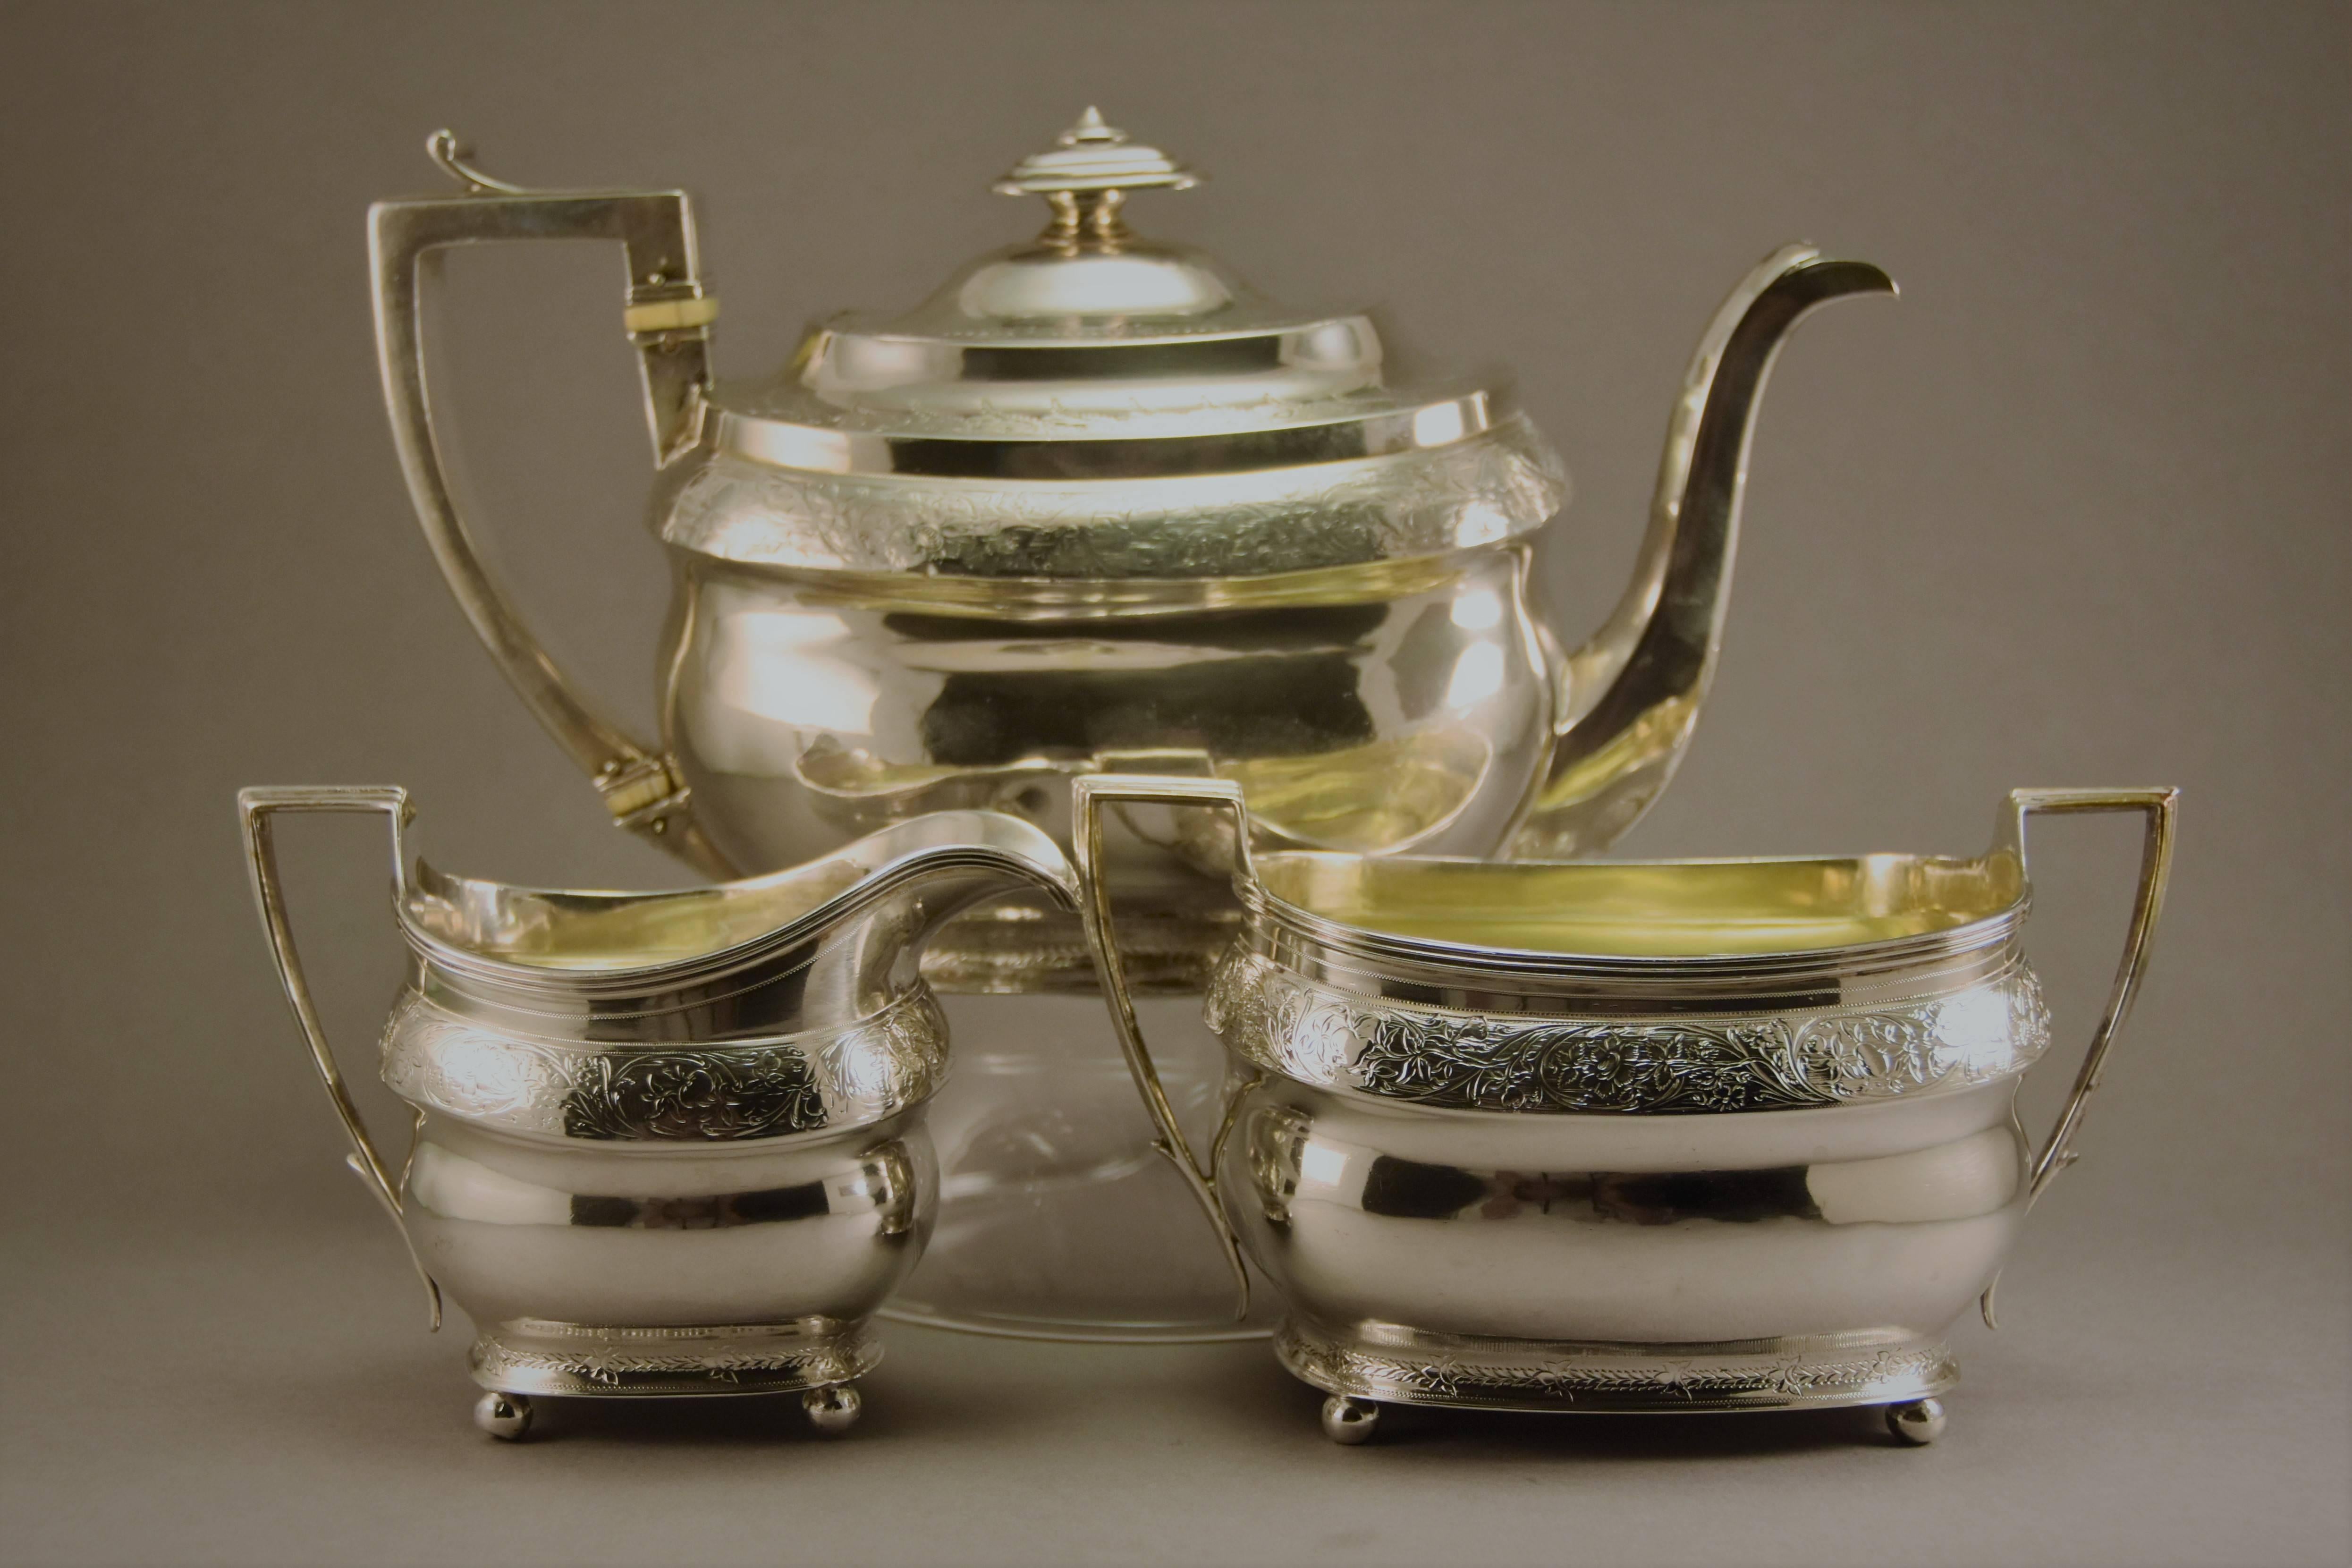 George III sterling silver tea set made in London by Napthali Hart hallmarked and dated 1805

Beautifully hand engraved with foliage and flowers. 
Oblong bellied form, scroll handles, the with insulators, a flush-hinged cover with a rectangular